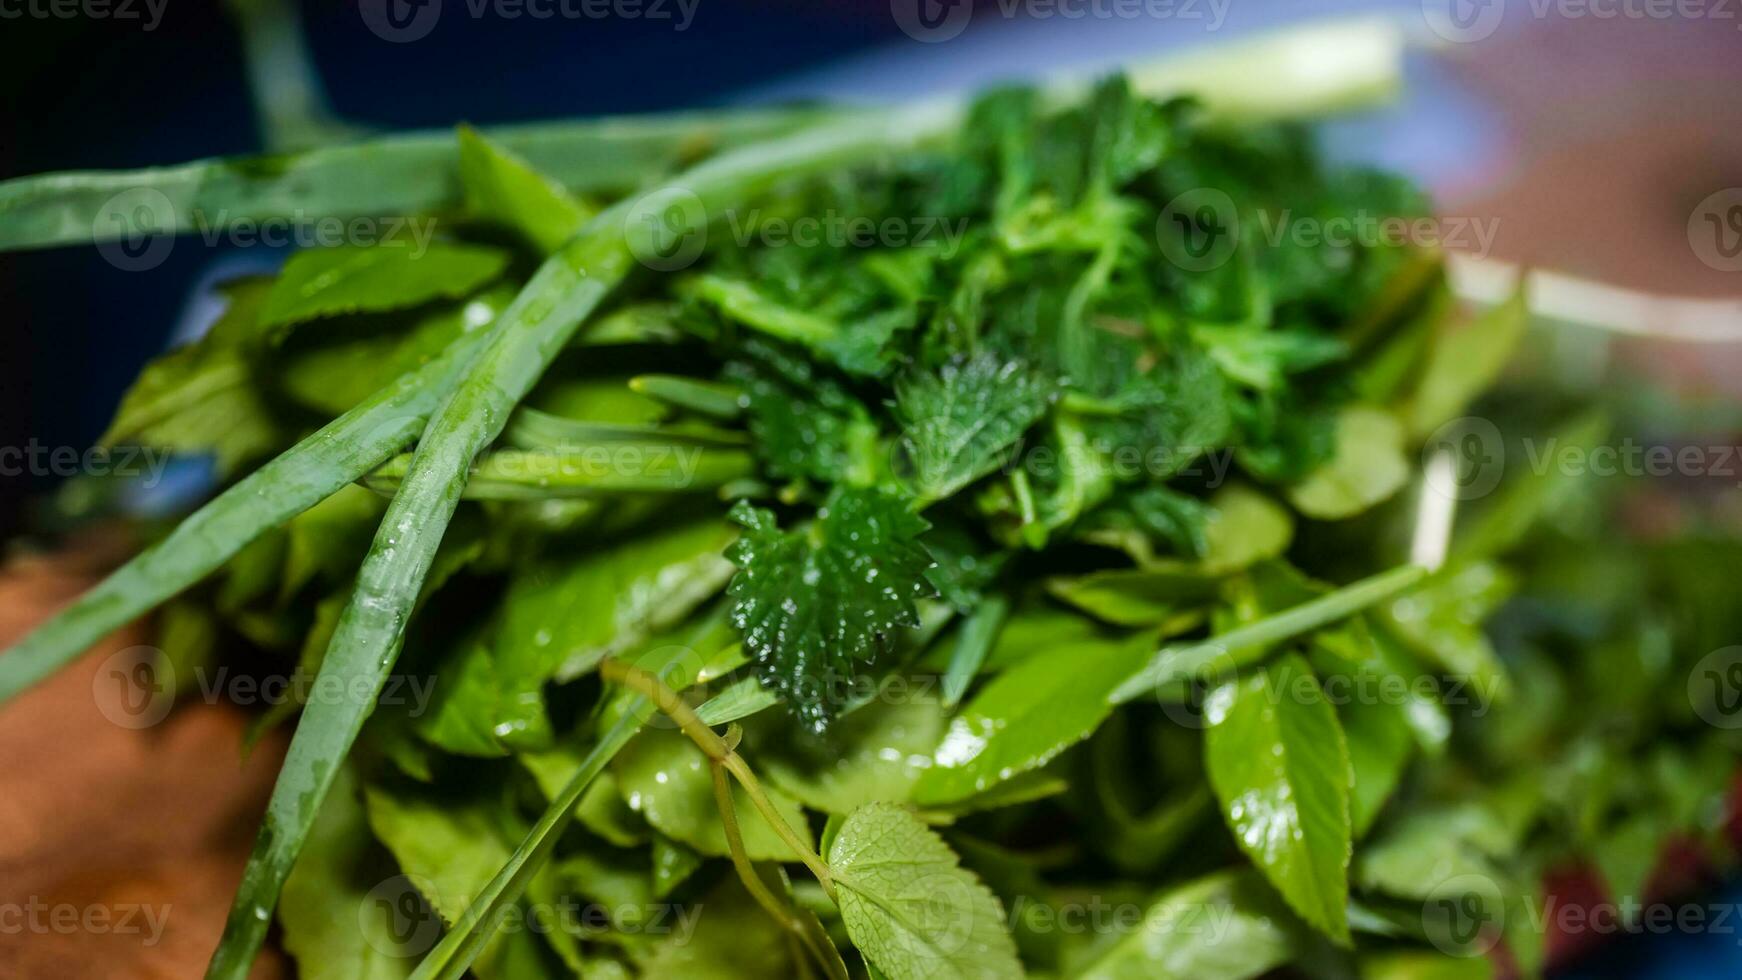 Vegetarian vitamin salad from first spring greens and wild herbs. Ingredients for home diet meal Aegopodium podagraria, Urtica dioica, Allium ursinum. Medicinal herb urtica dioica plant cooking food. Vegetarian vitamin salad from first spring greens and w photo